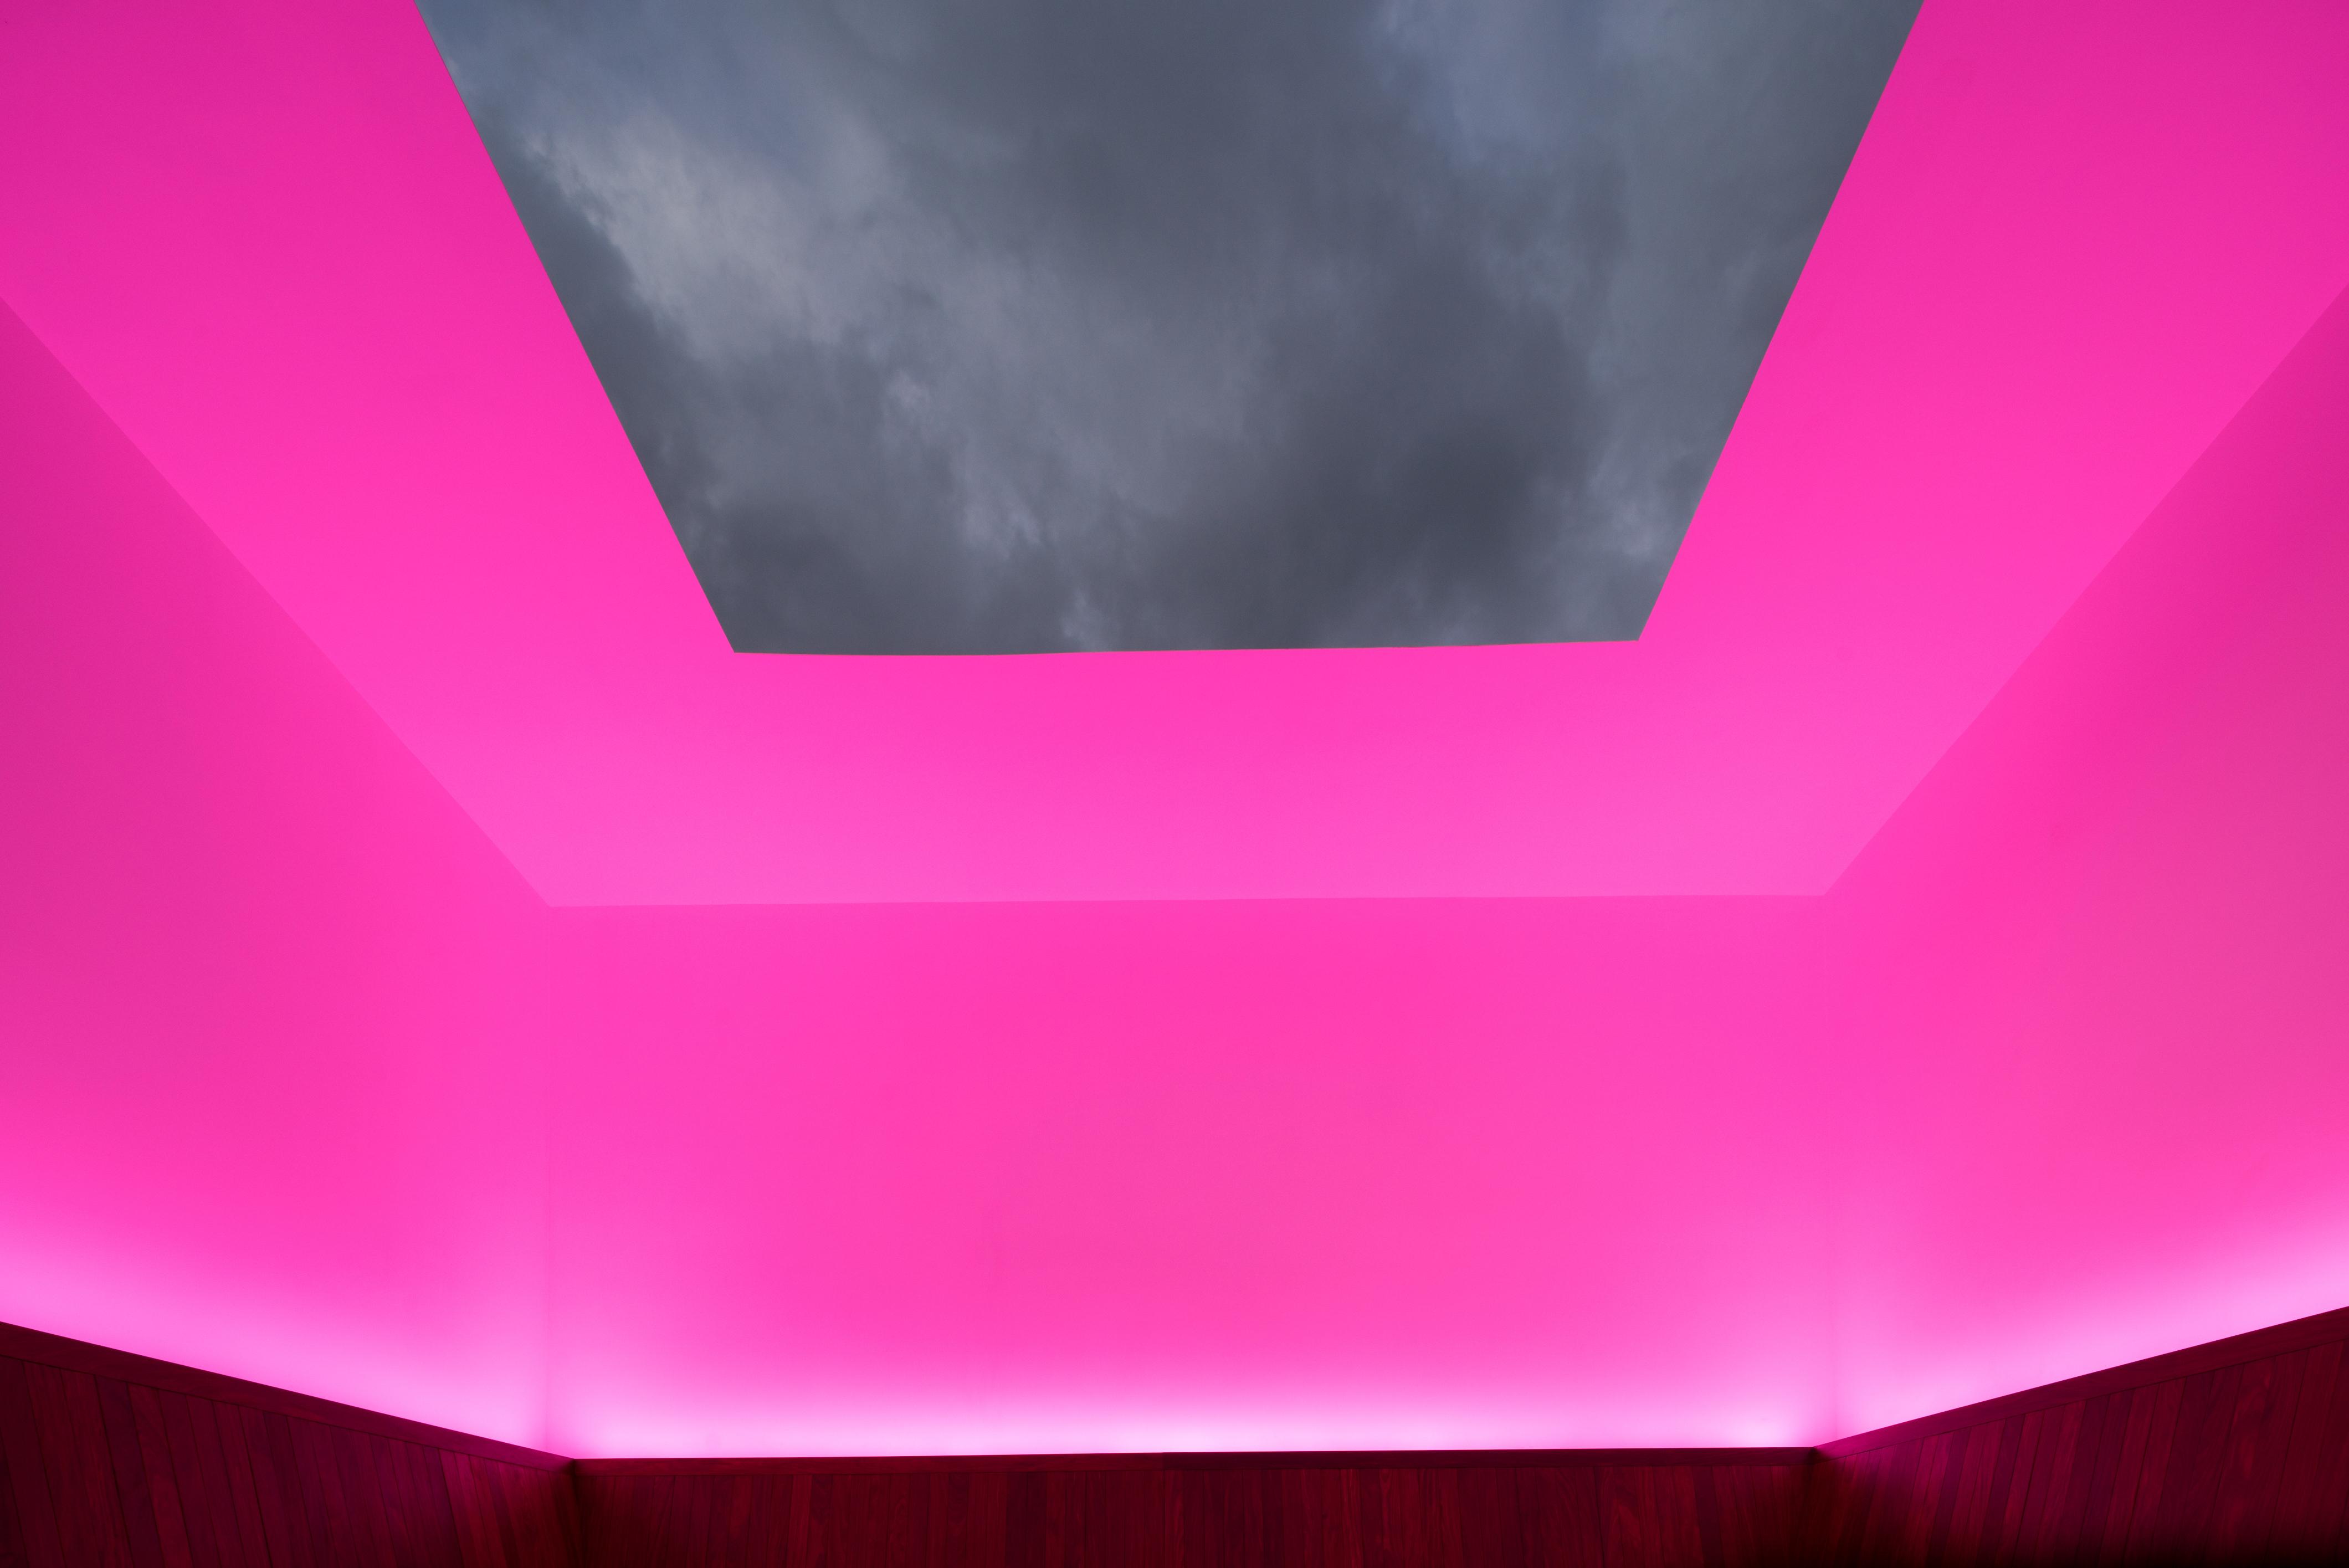 Sunset Viewing of James Turrell: Meeting Monday